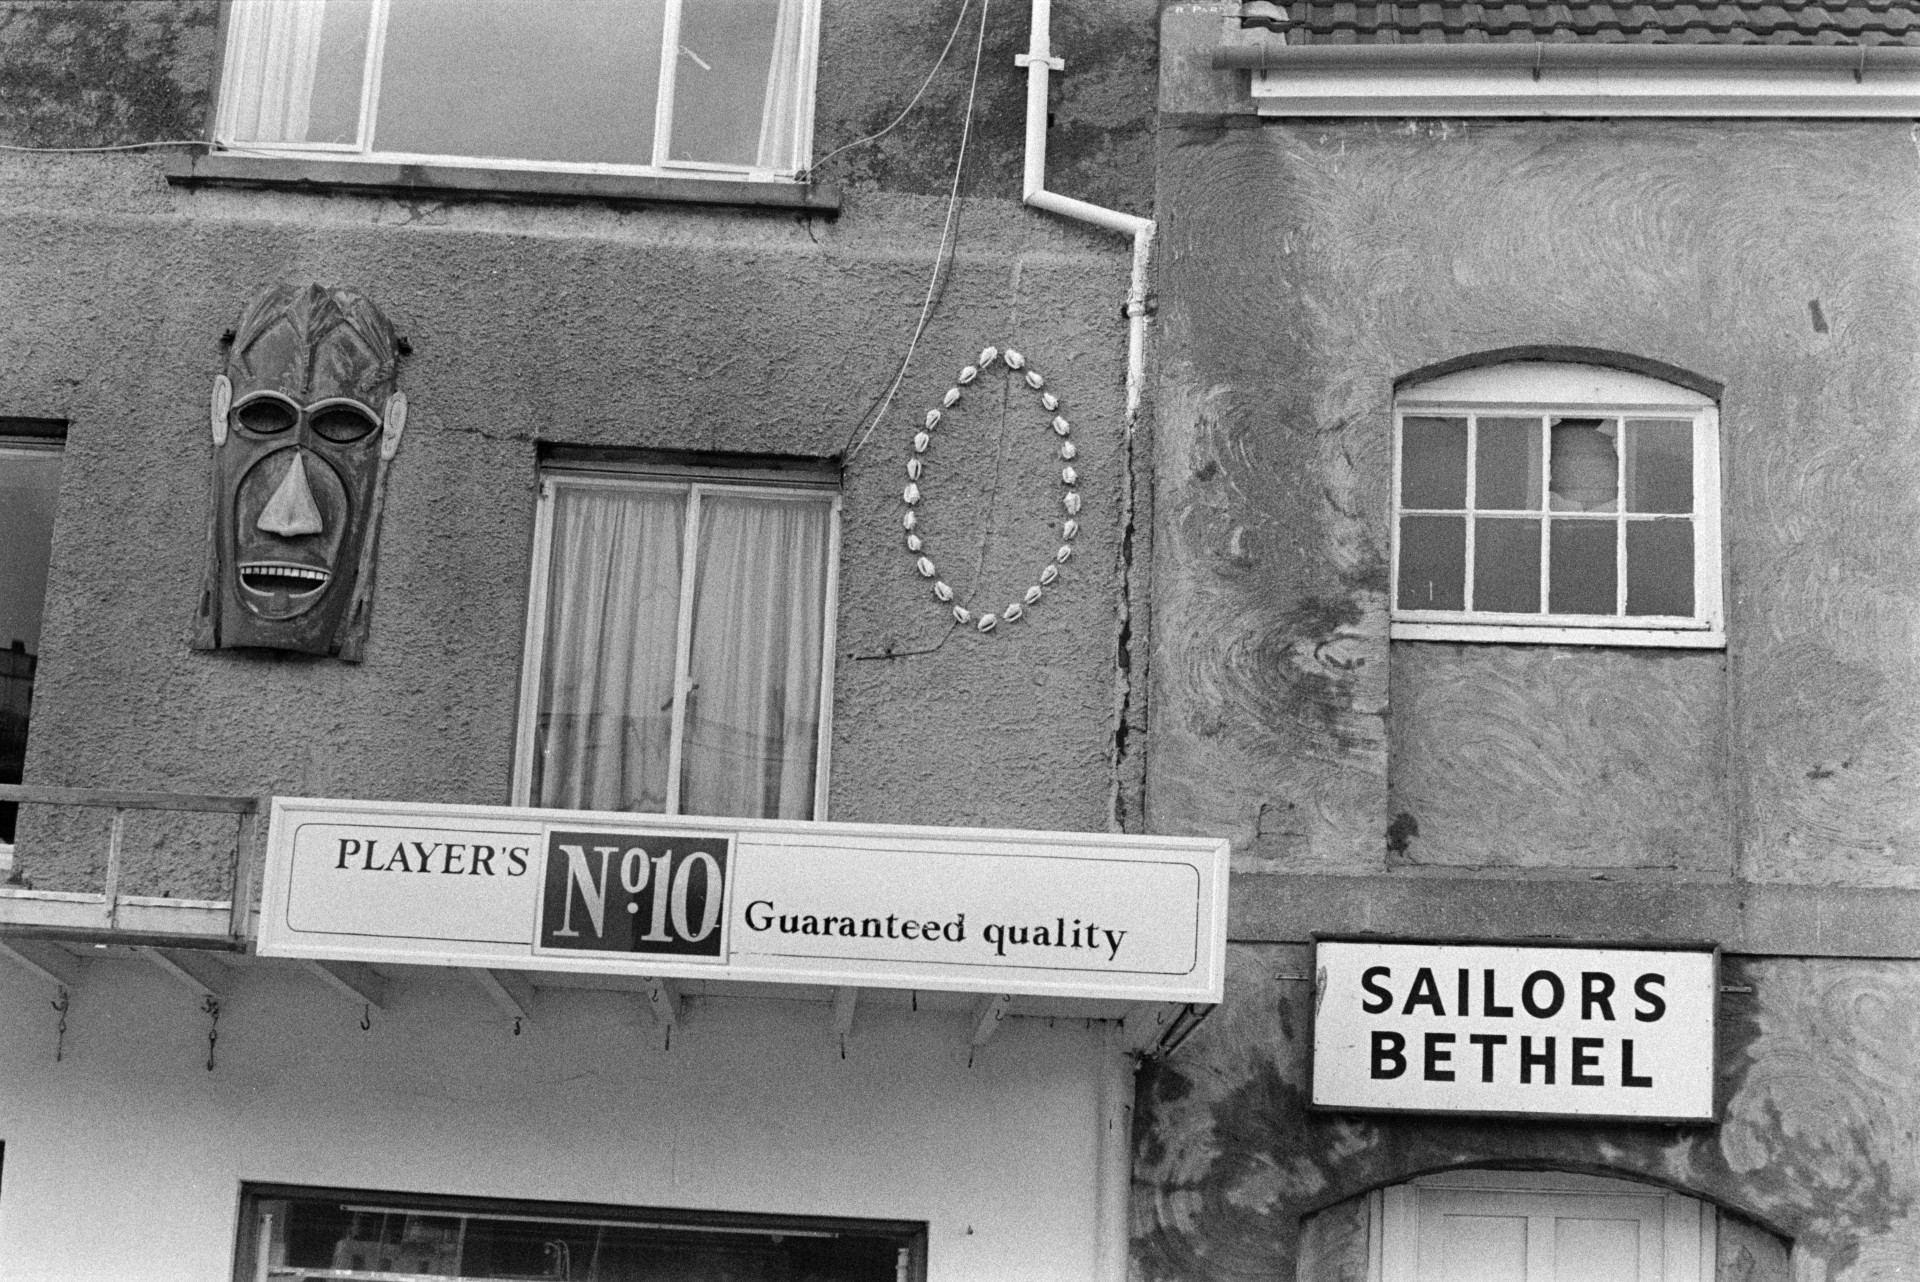 The exterior of the Sailor's Bethel or chapel at Ilfracombe. A shop next door has a sign advertising Players No.10 cigarettes, a pattern of shells and a carved wooden mask.